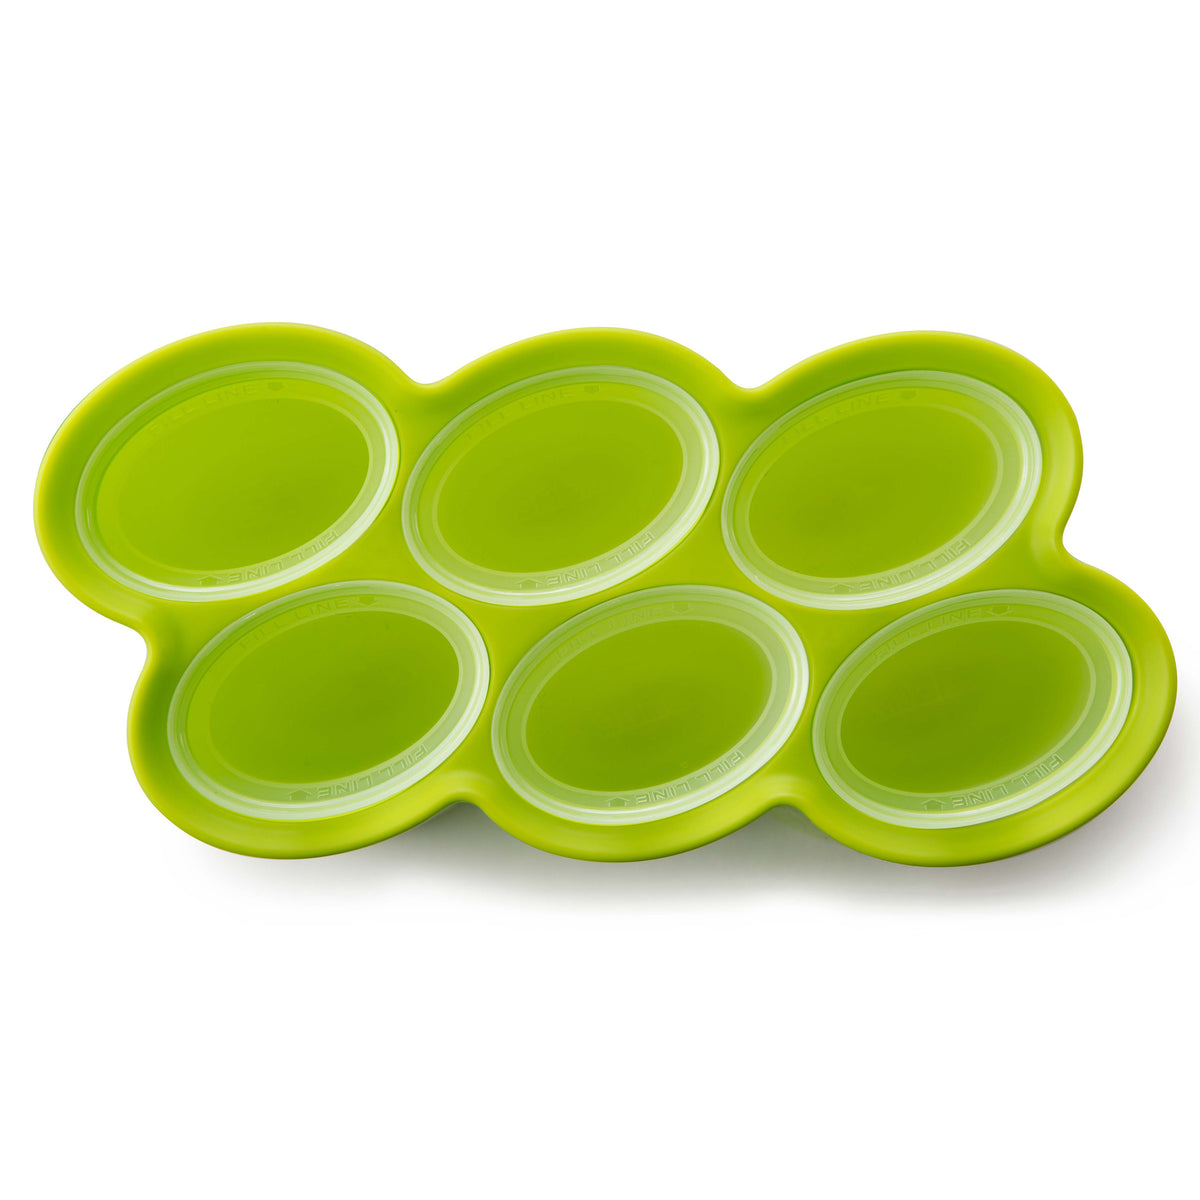 buy ice cube molds & trays at cheap rate in bulk. wholesale & retail kitchen gadgets & accessories store.